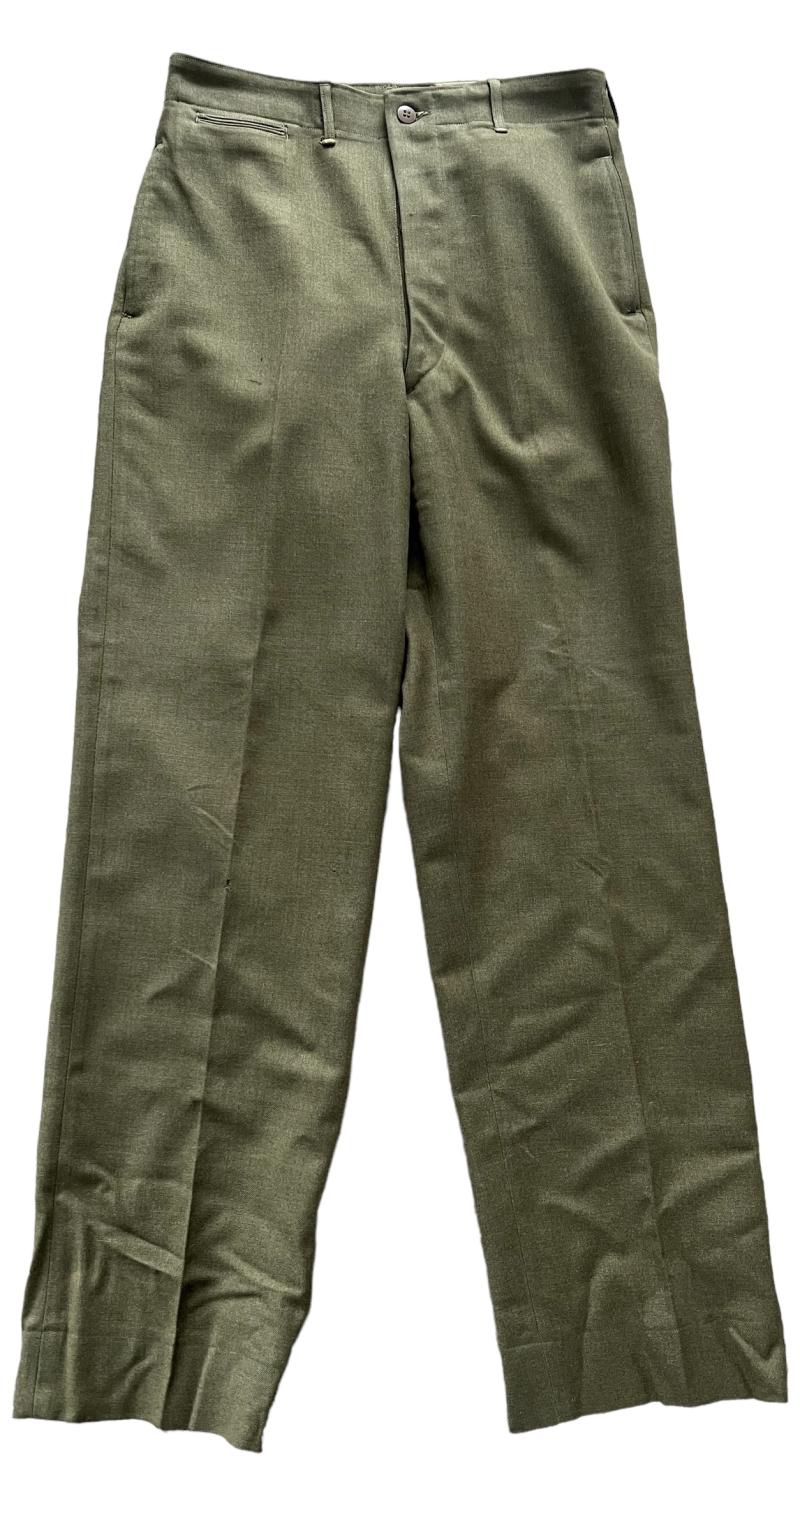 U.S. Service Trousers or so-called Mustards 1942 - Near Mint Condition